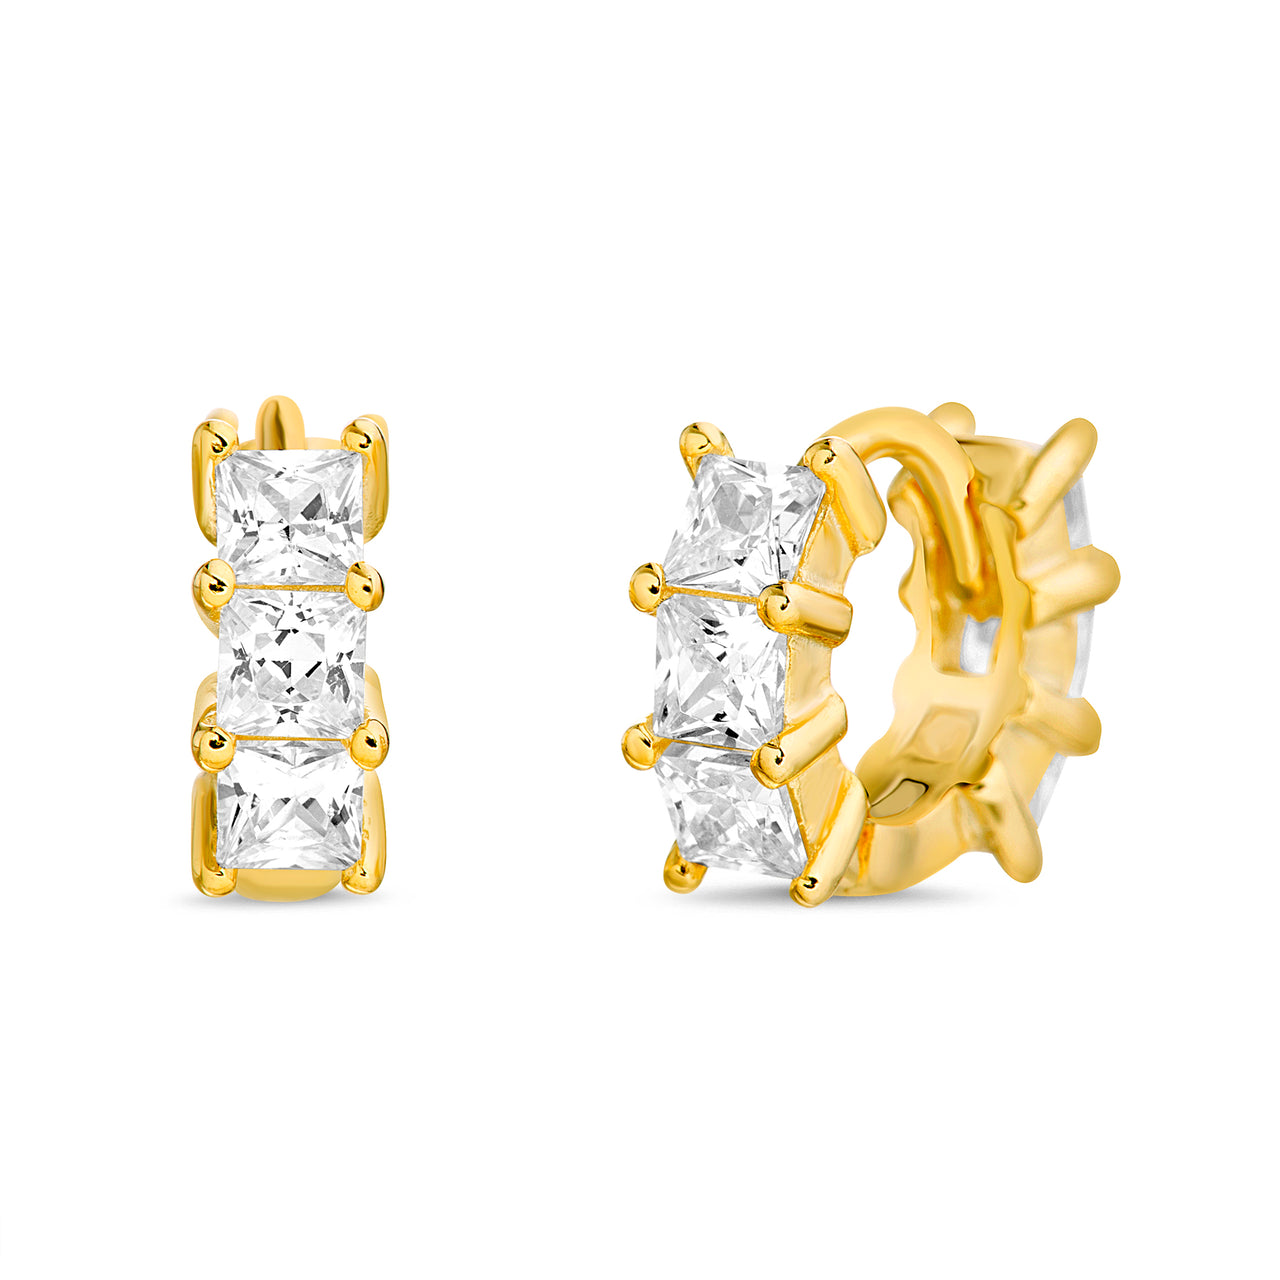 Lesa Michele Yellow Gold Plated Sterling Silver Cubic Zirconia Princess Cut Huggie Earrings